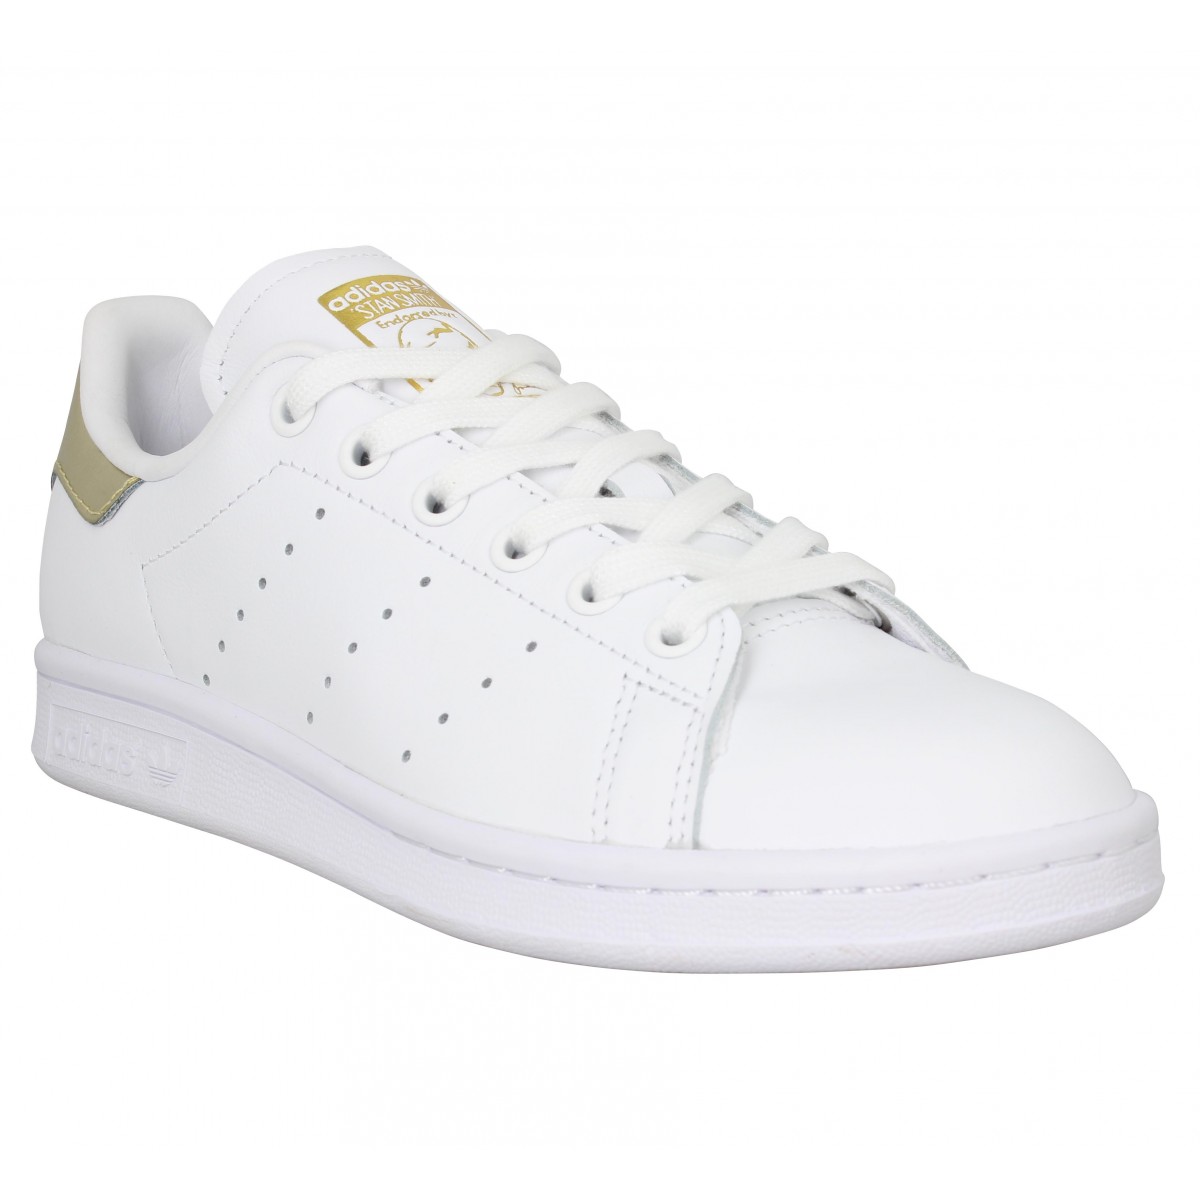 adidas montant femme blanche